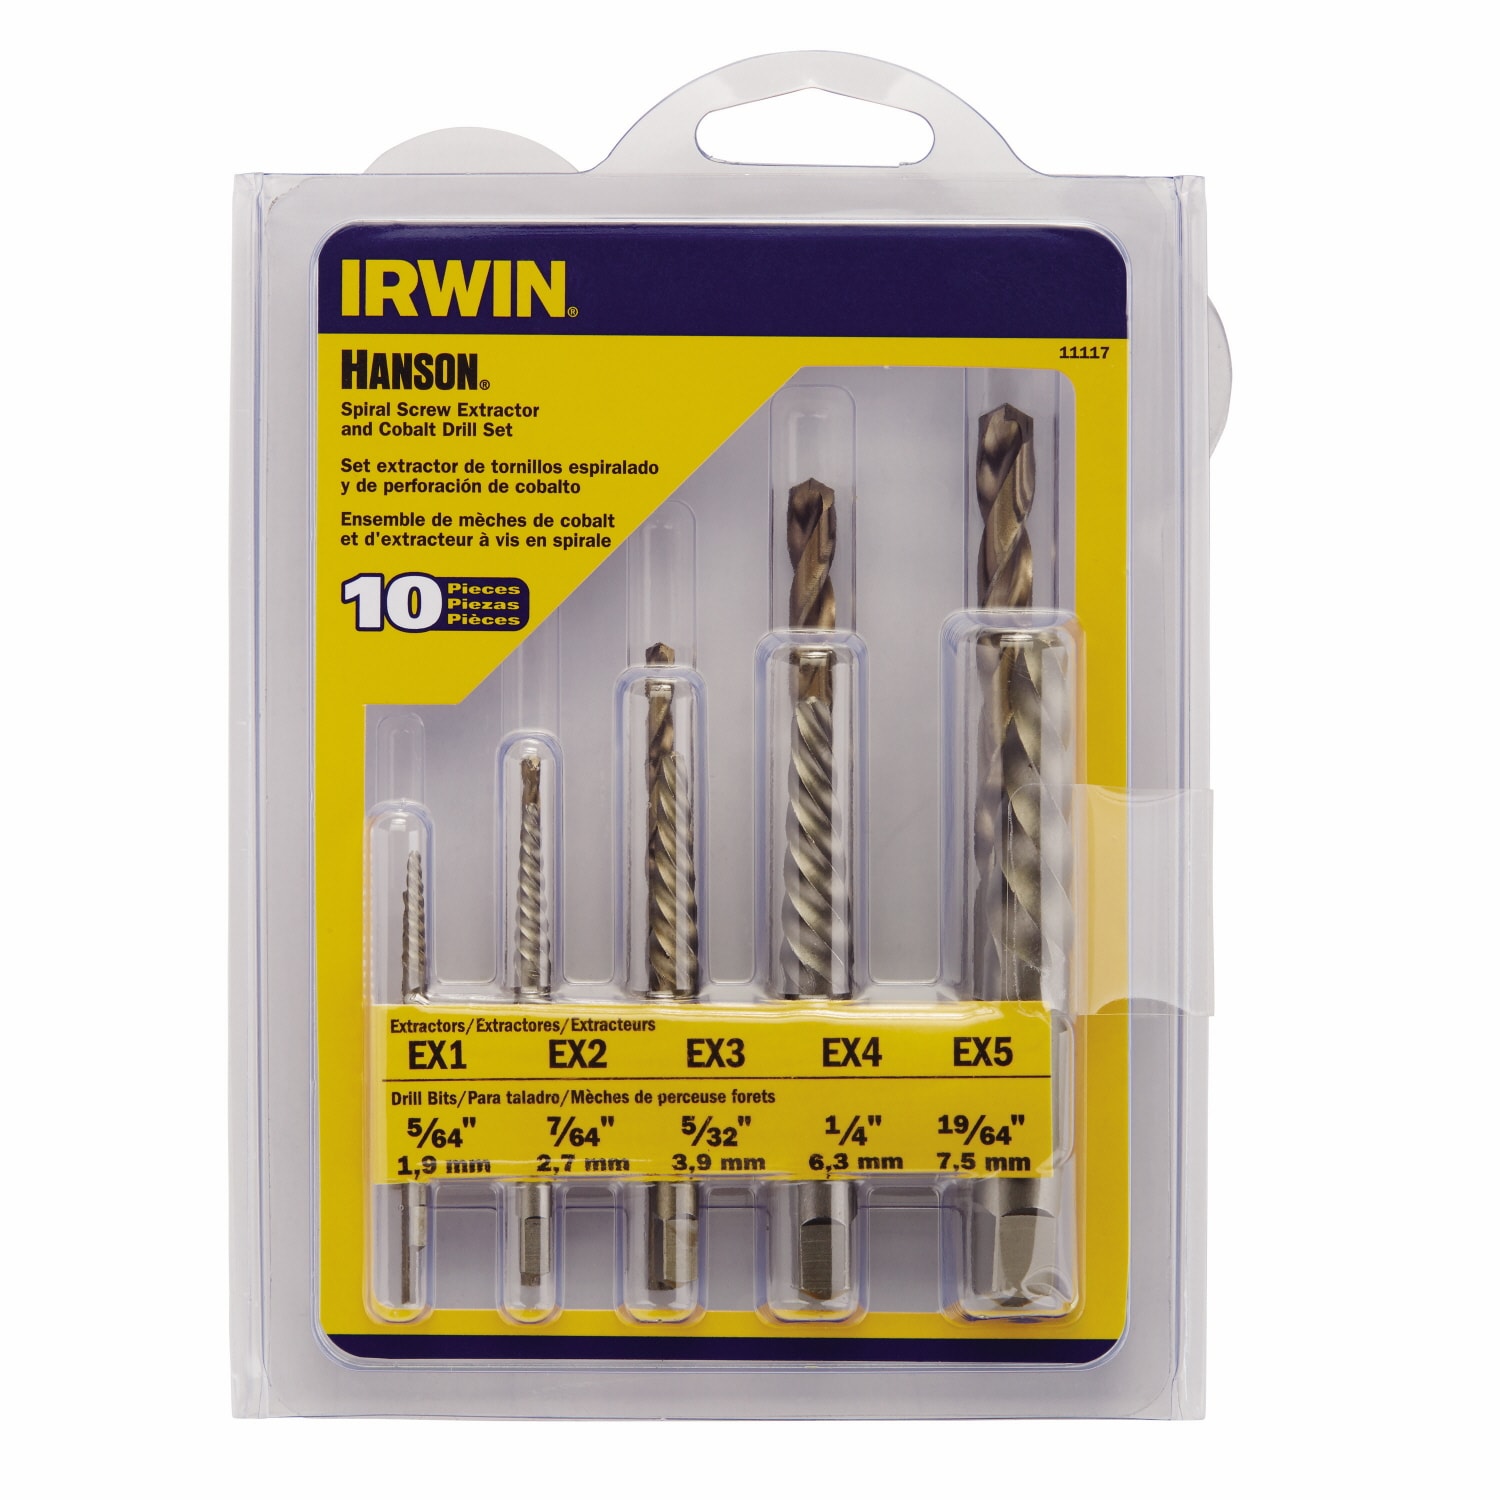 IRWIN Screw Extractors & Sets at Lowes.com